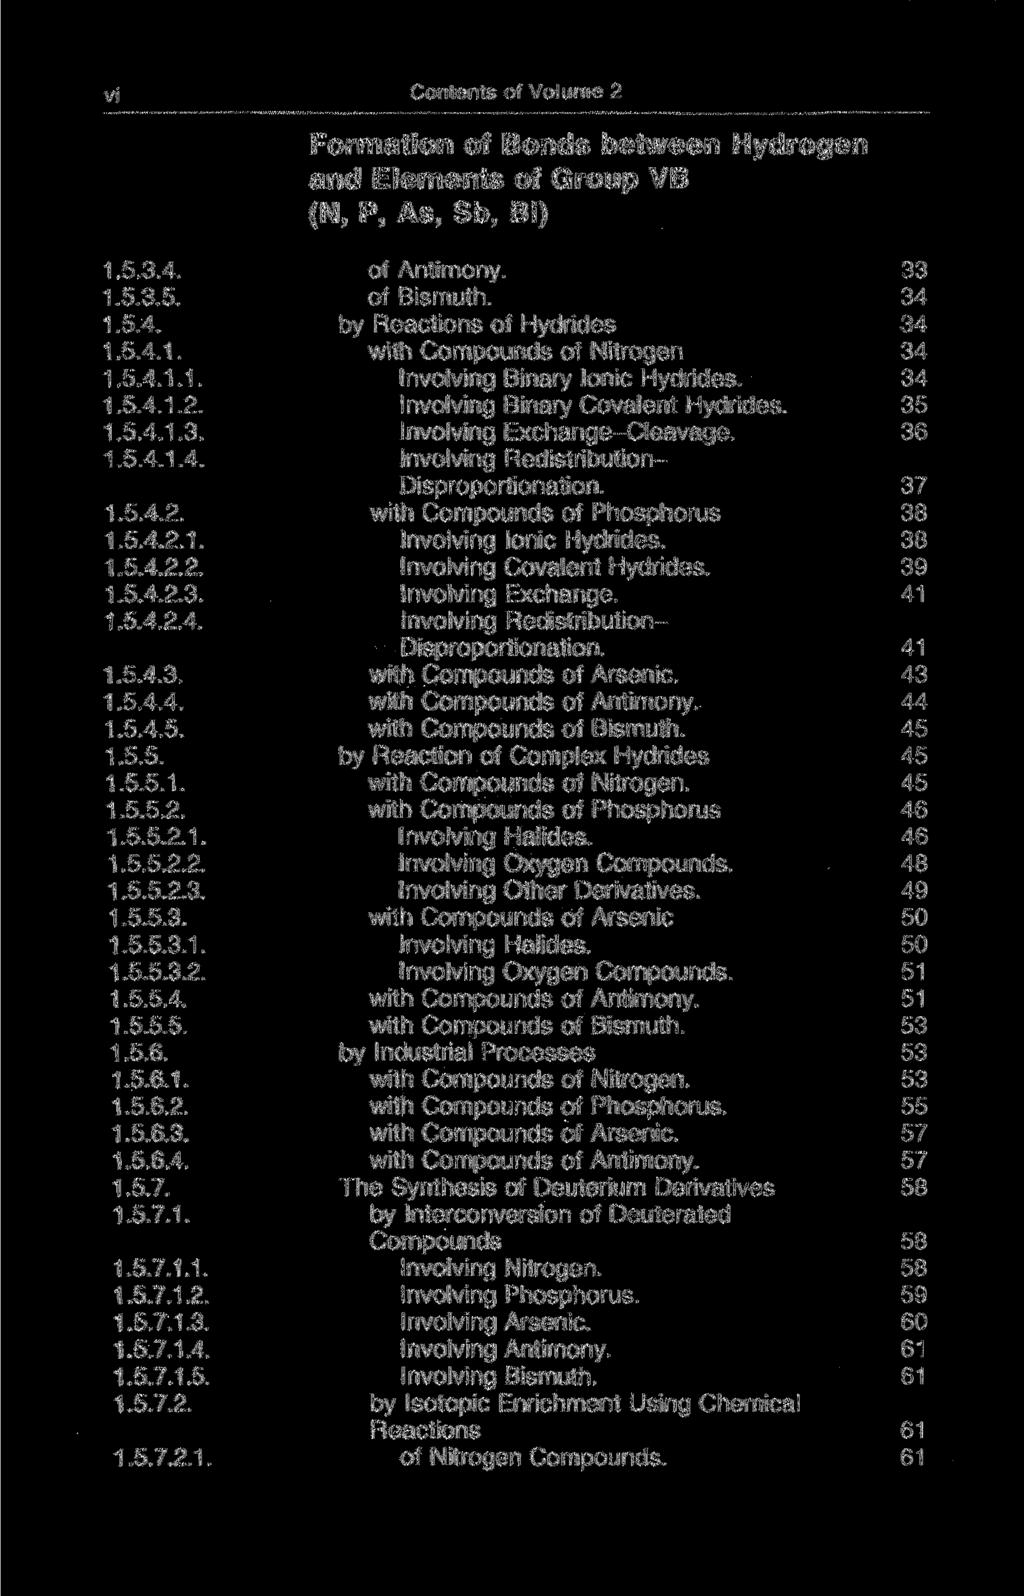 vi Contents of Volume 2 Formation of Bonds between Hydrogen and Elements of Group VB (N, P, As, Sb, Bi) 1.5.3.4. 1.5.3.5. 1.5.4. 1.5.4.1. 1.5.4.1.1. 1.5.4.1.2. 1.5.4.1.3. 1.5.4.1.4. 1.5.4.2. 1.5.4.2.1. 1.5.4.2.2. 1.5.4.2.3. 1.5.4.2.4. 1.5.4.3. 1.5.4.4. 1.5.4.5. 1.5.5. 1.5.5.1. 1.5.5.2. 1.5.5.2.1. 1.5.5.2.2. 1.5.5.2.3. 1.5.5.3. 1.5.5.3.1. 1.5.5.3.2. 1.5.5.4. 1.5.5.5. 1.5.6.